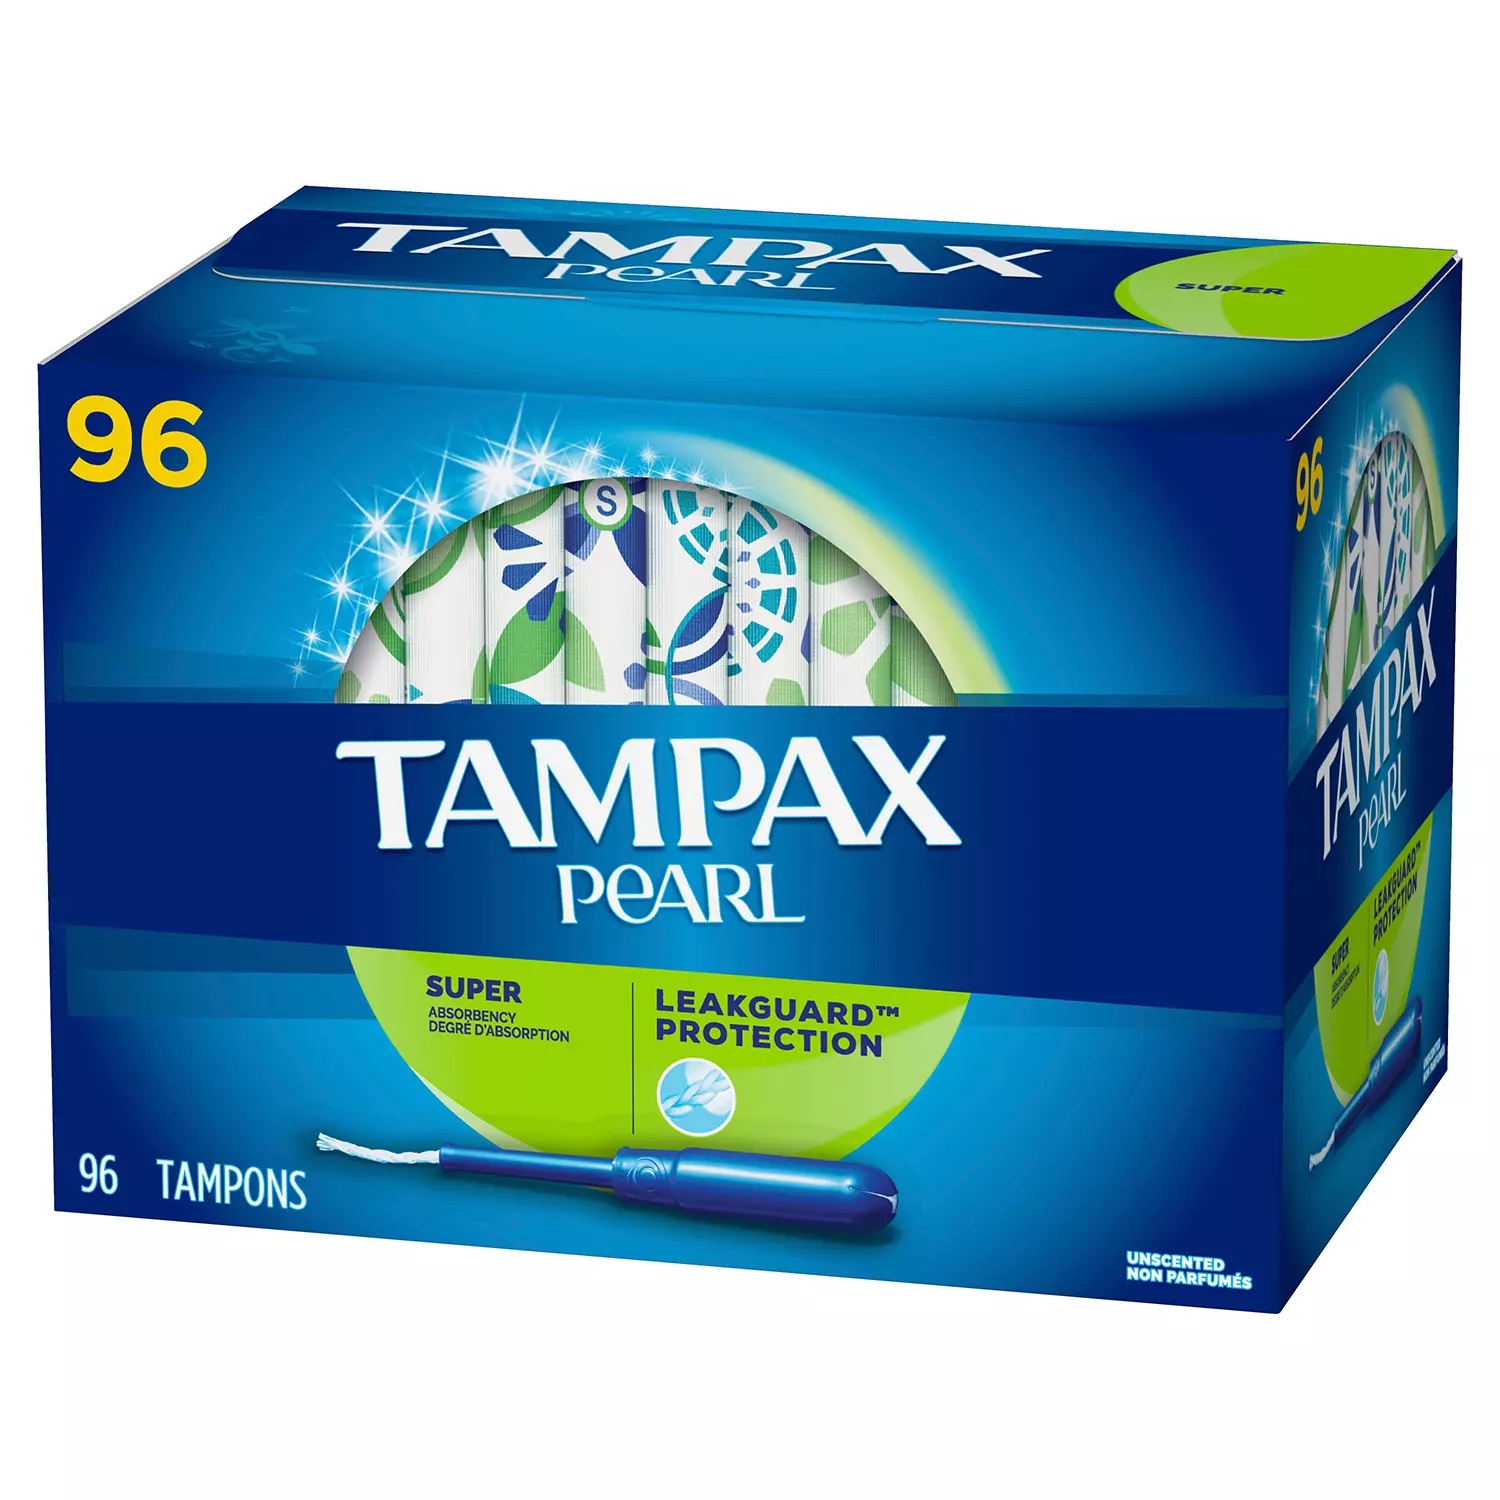 Tampax Pearl Super Tampons - 96 Piece